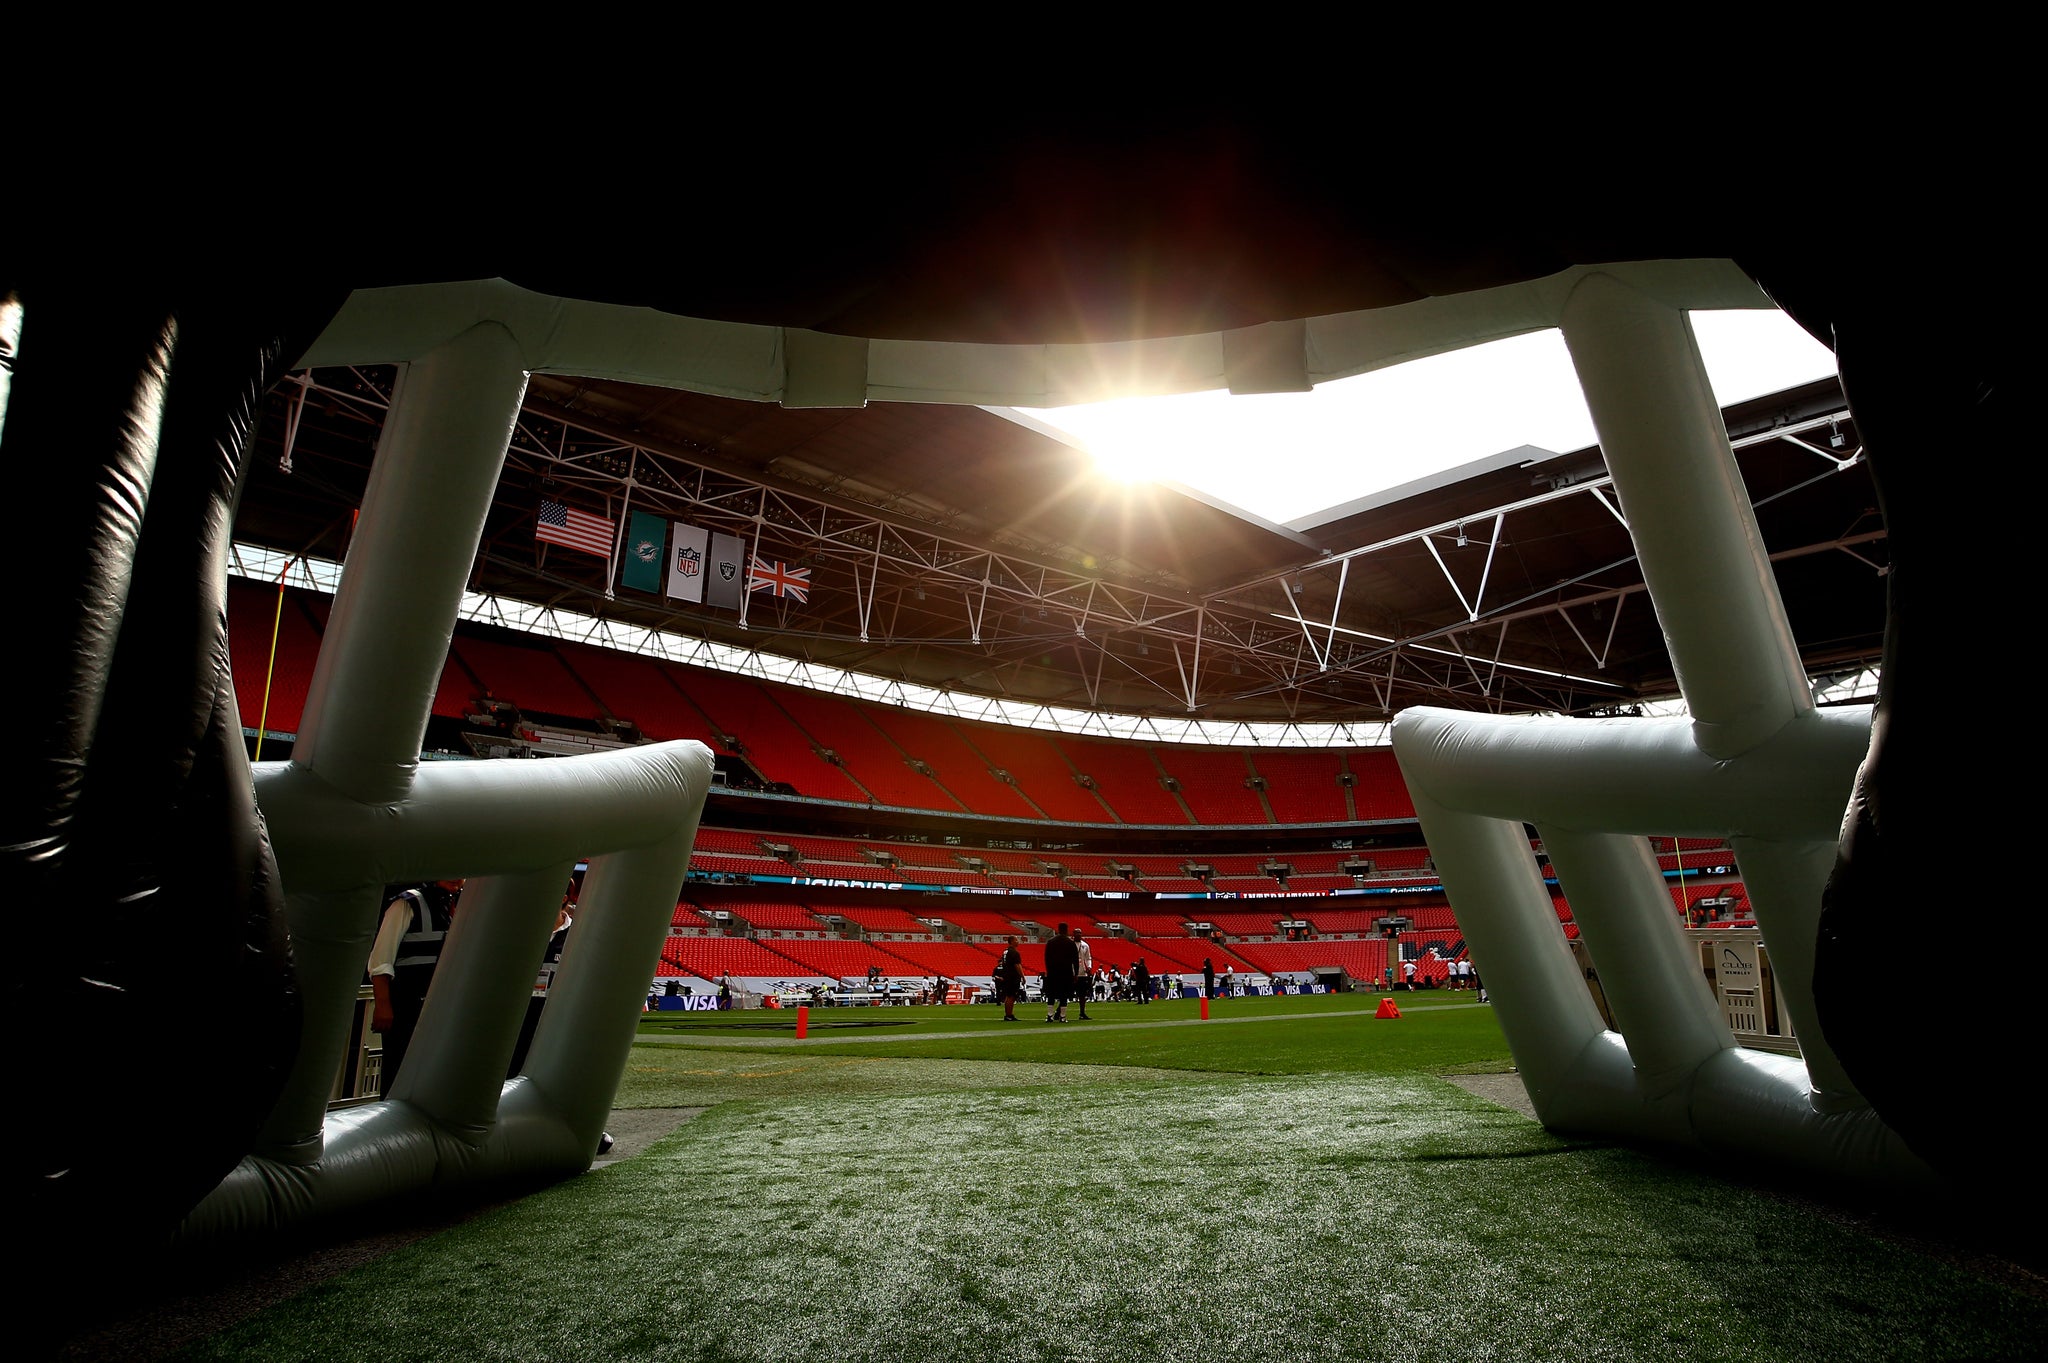 A view from the tunnel at Wembley